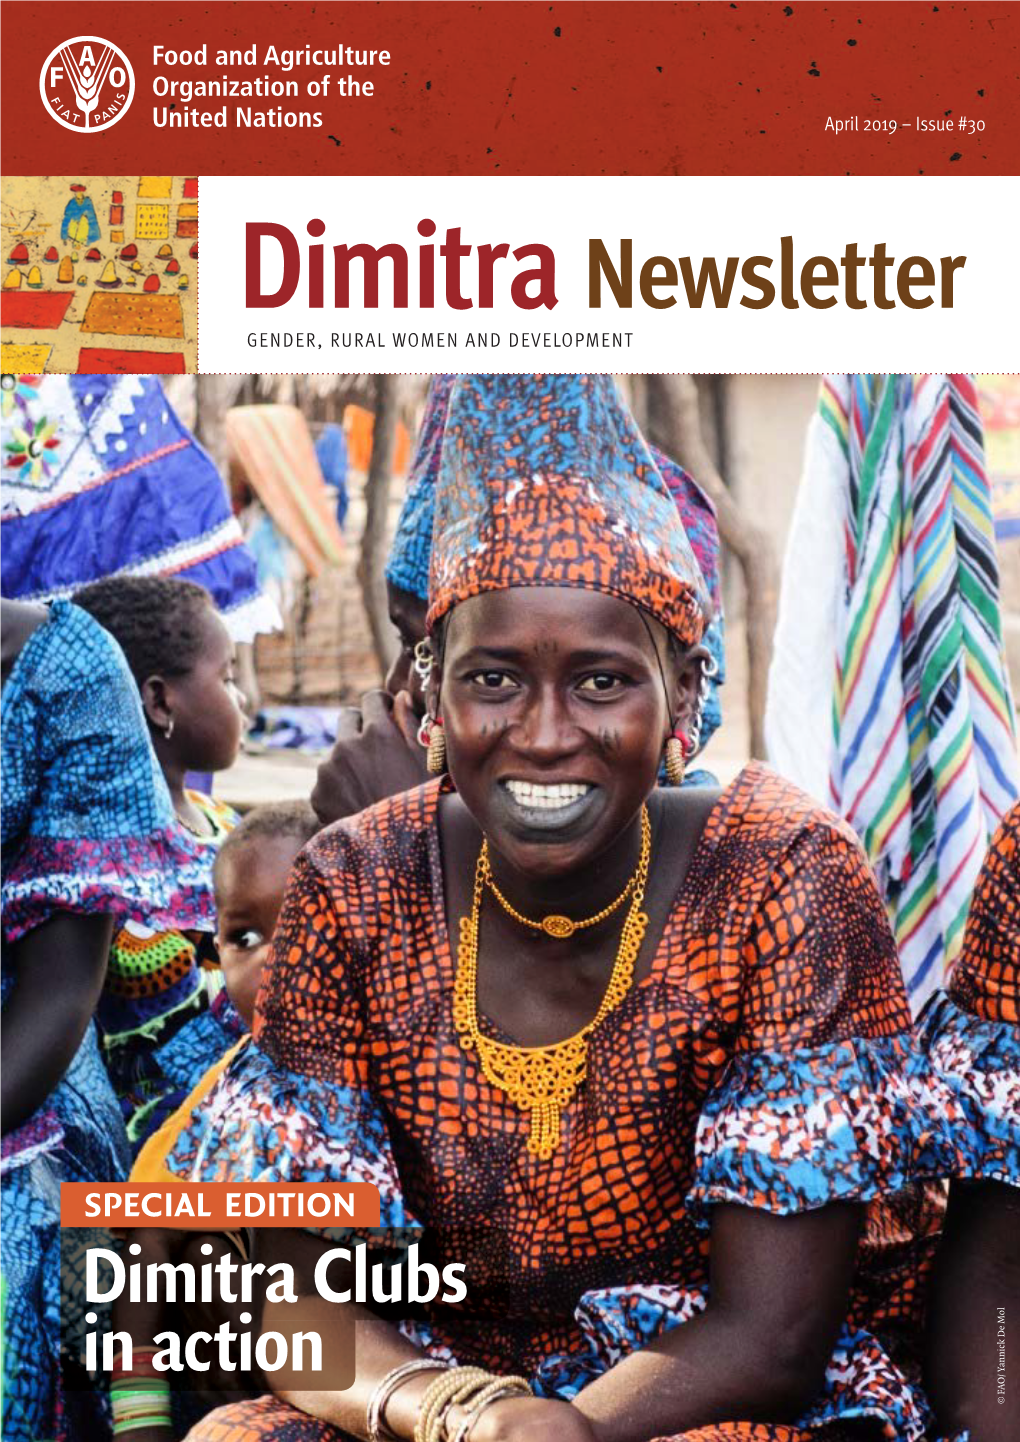 DIMITRA CLUBS in ACTION Special Edition of the Dimitra Newsletter